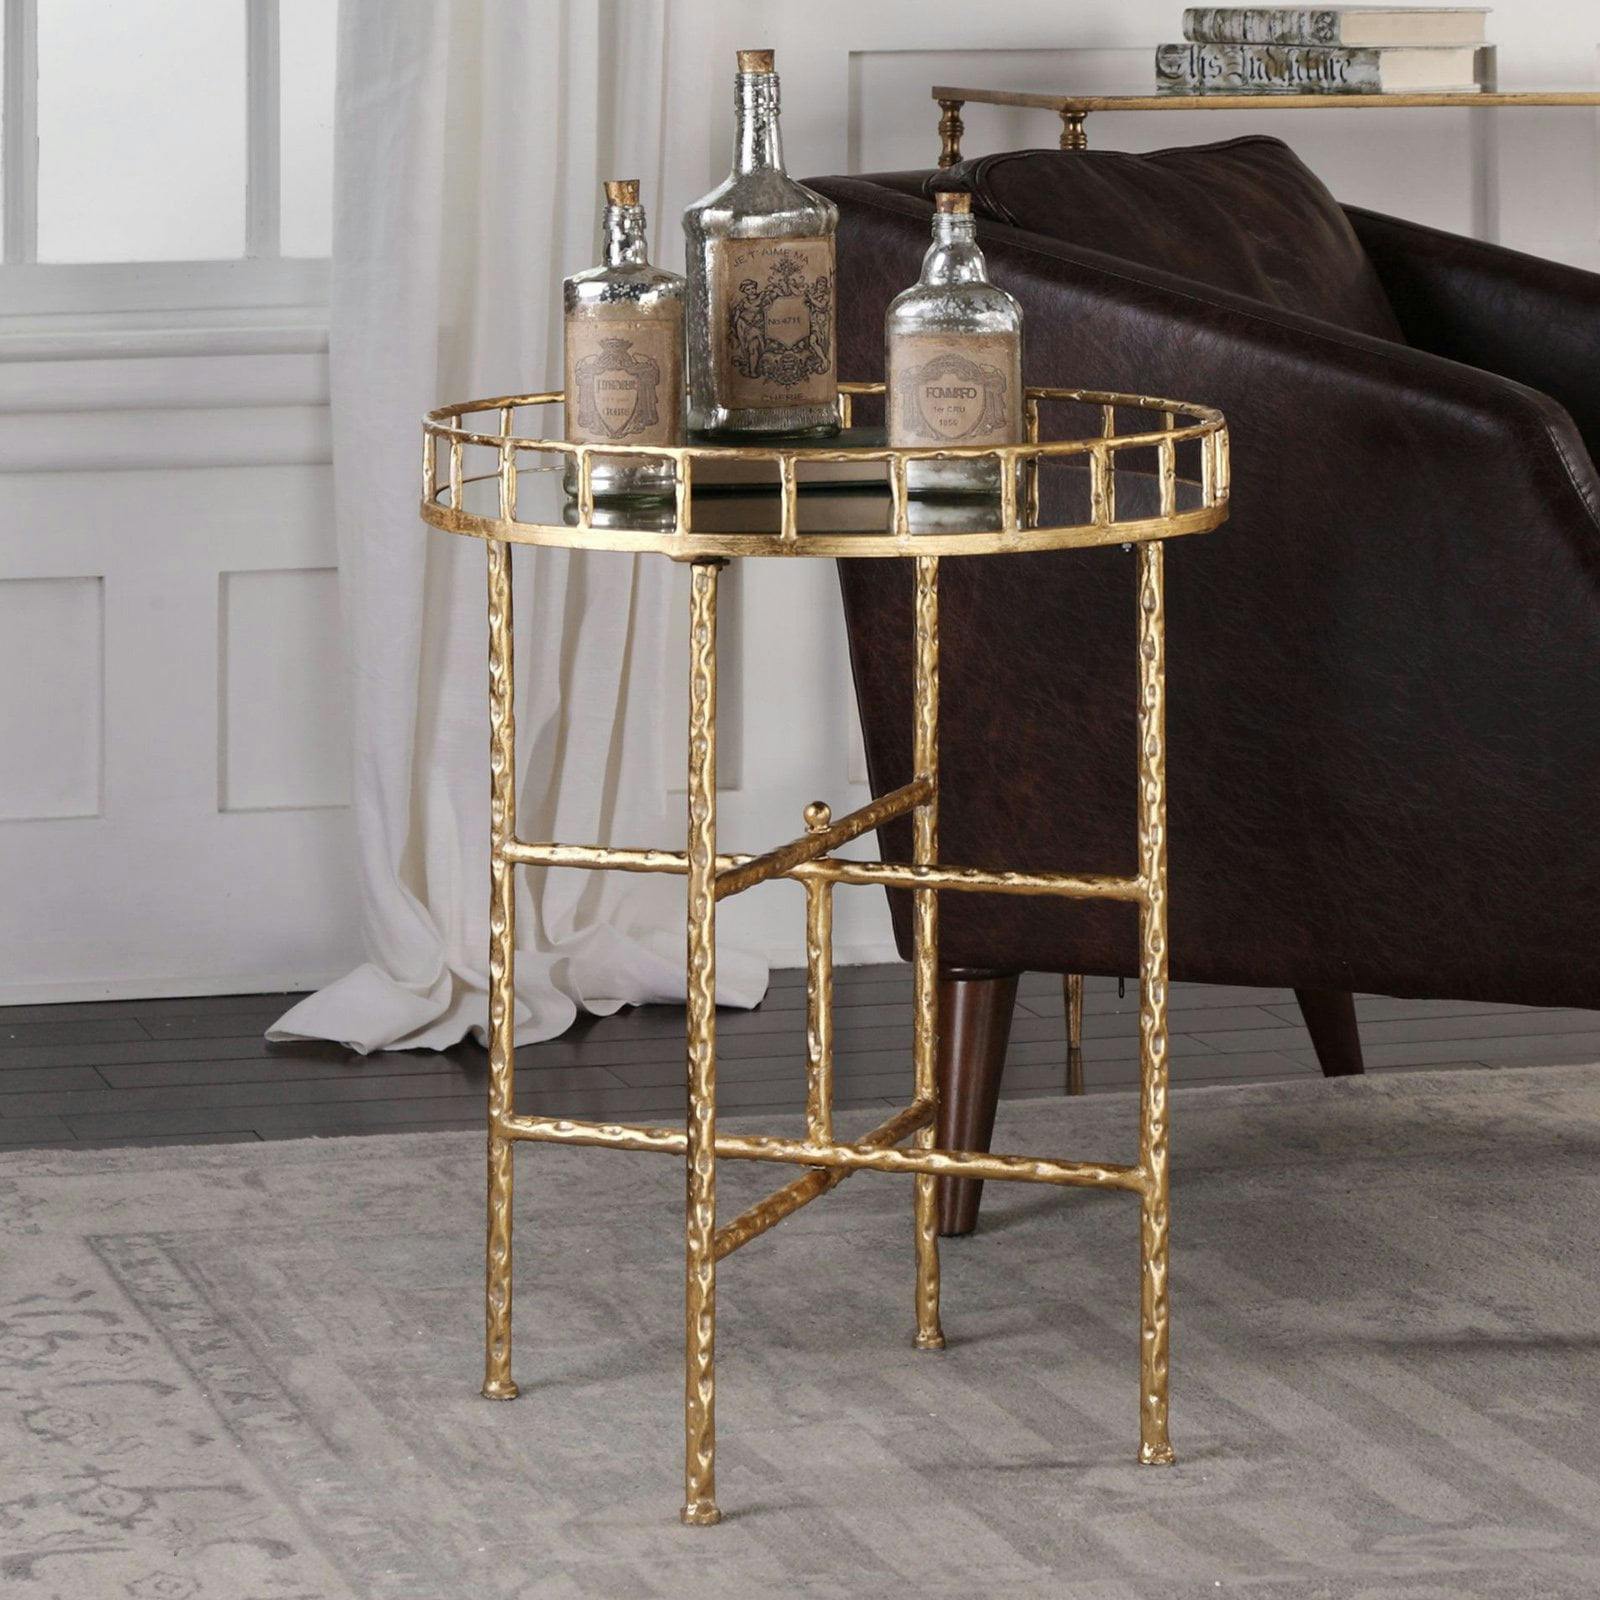 Elysian 20" Gold Mirrored Round Accent Table with Cross Bar Base